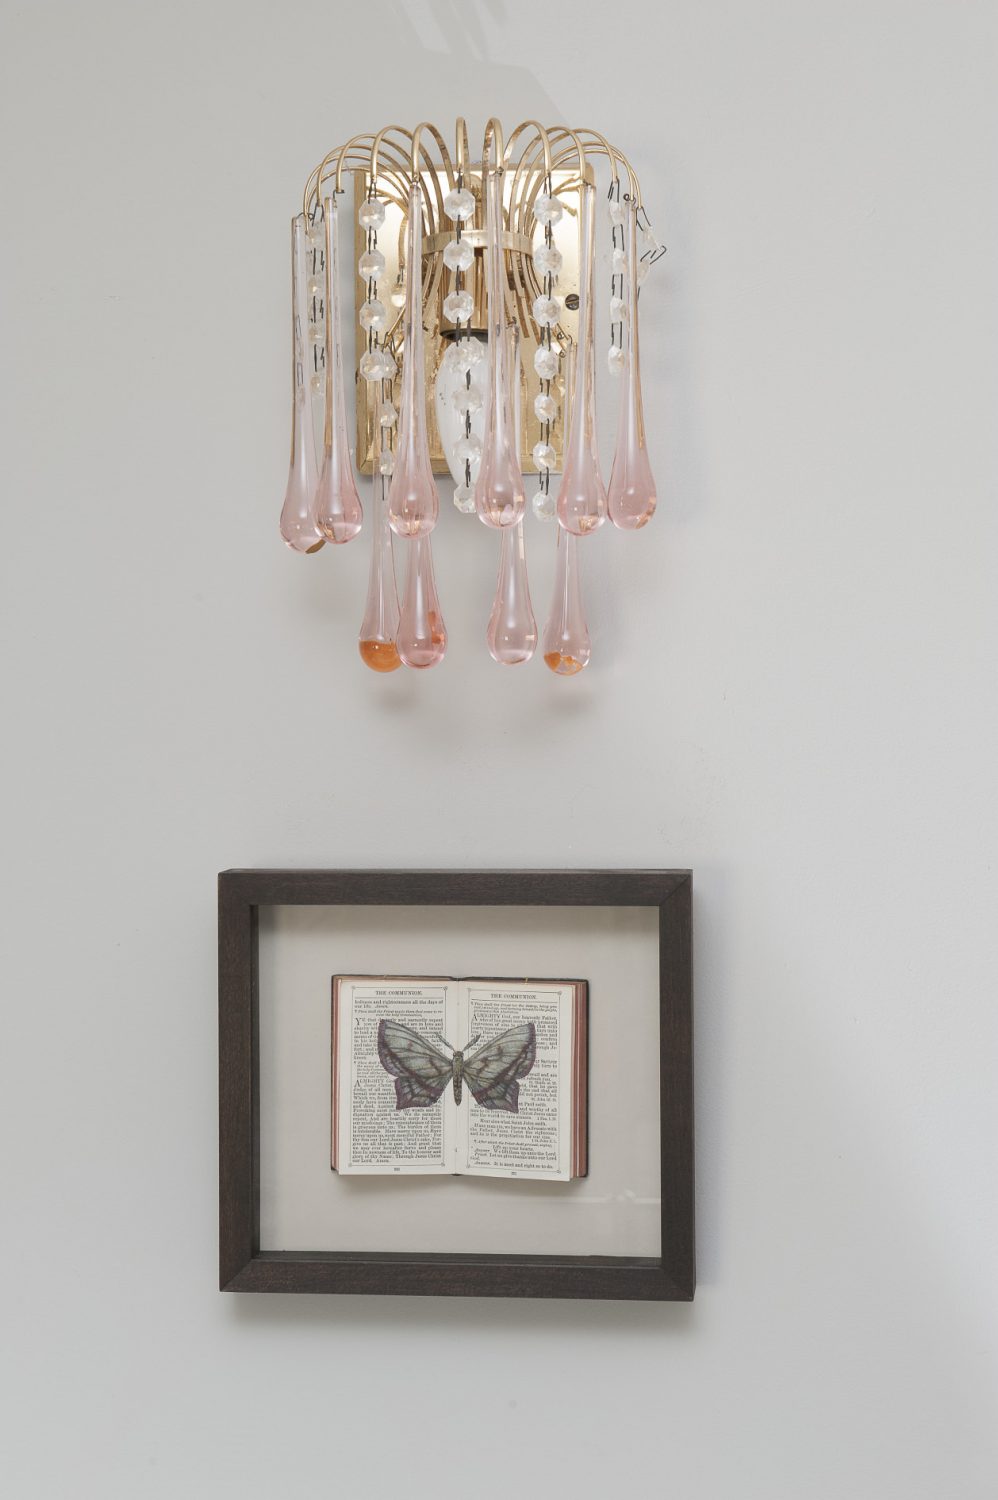 The walls are home to a collection of artist Helen Hunt’s lepidopterology studies